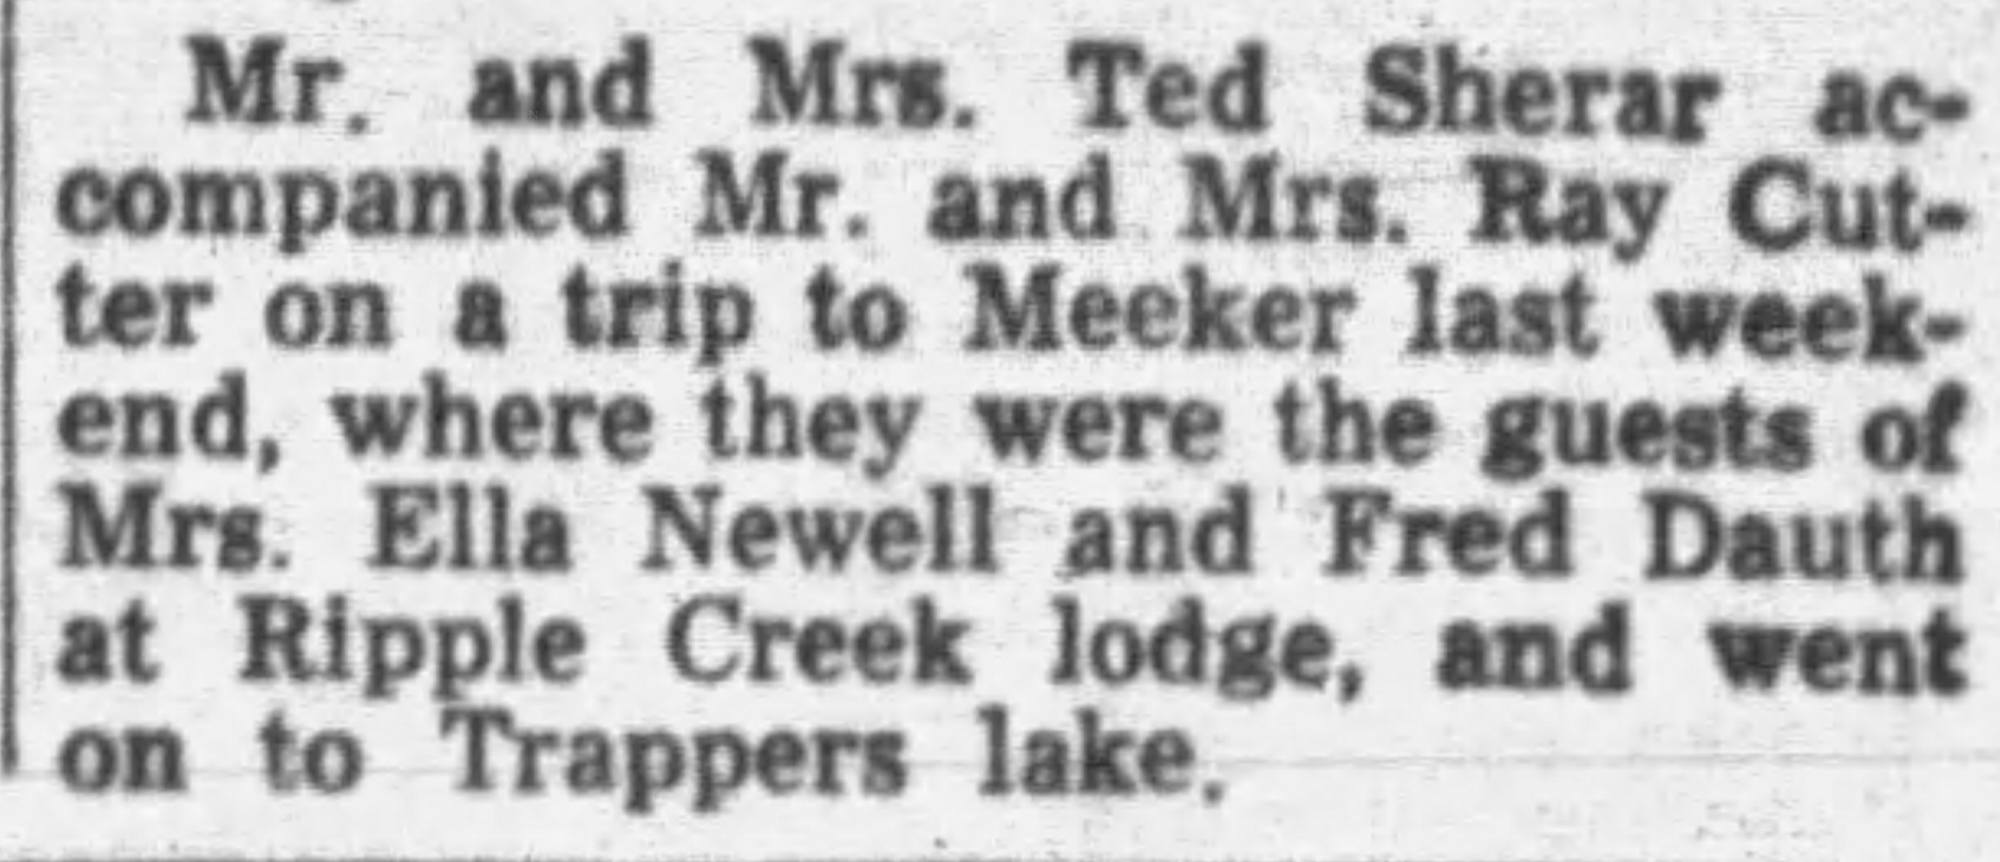 Dauth Family Archive - 1948-07-18 - The Daily Sentinel - Fred Dauth Of Ripple Creek Lodge